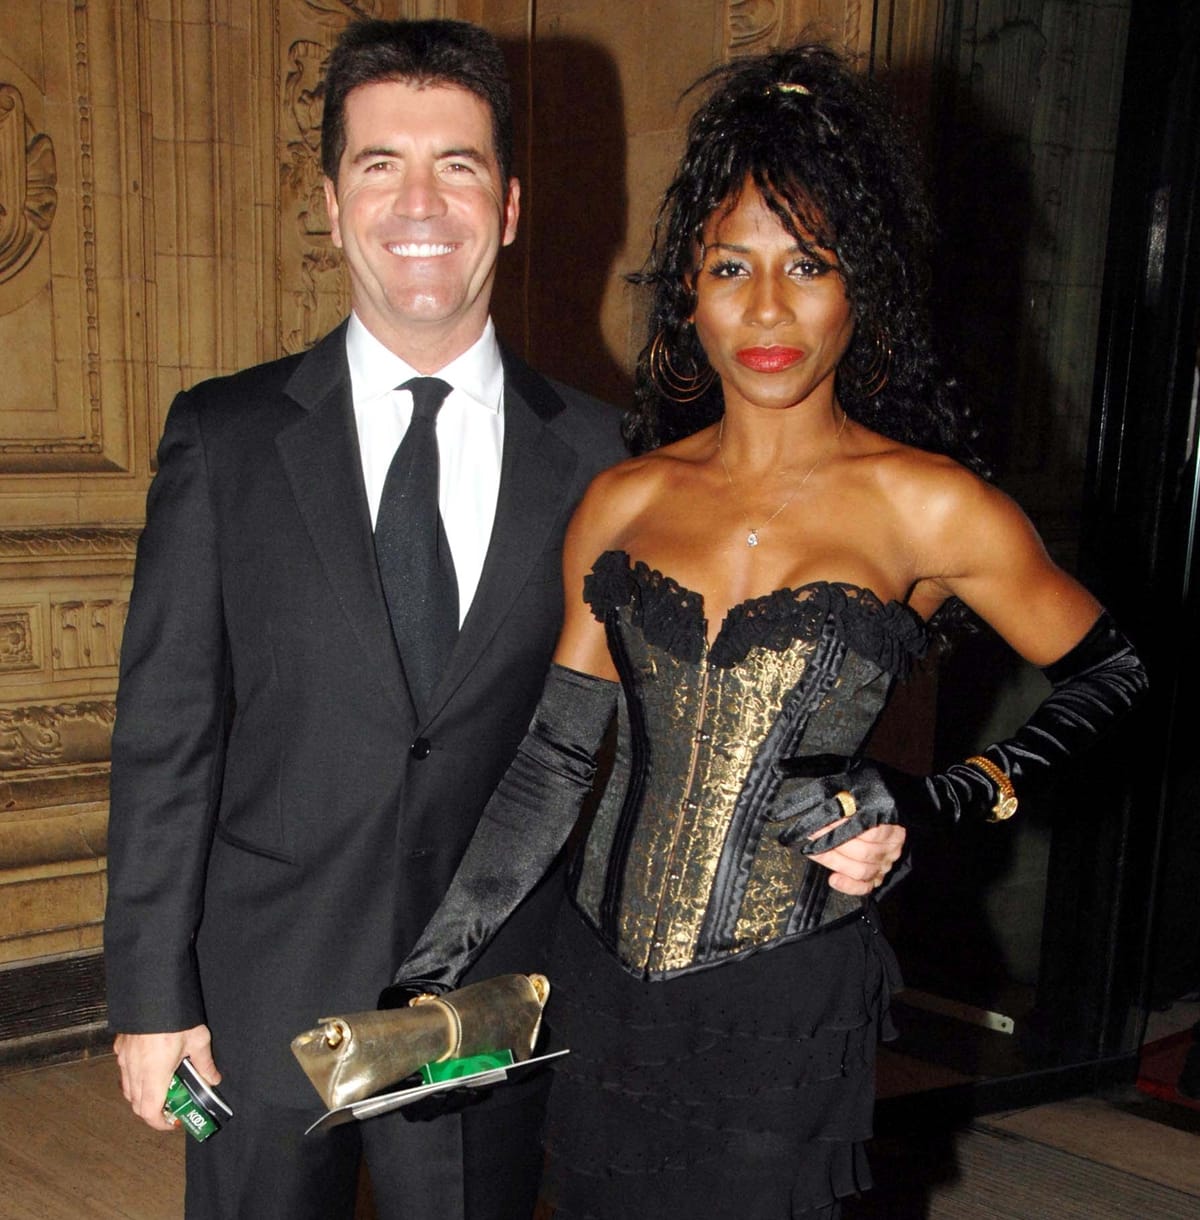 Simon Cowell chose his ex-girlfriend Sinitta to be the godmother of his son, Eric, which came as a surprise to some due to their previous romantic history